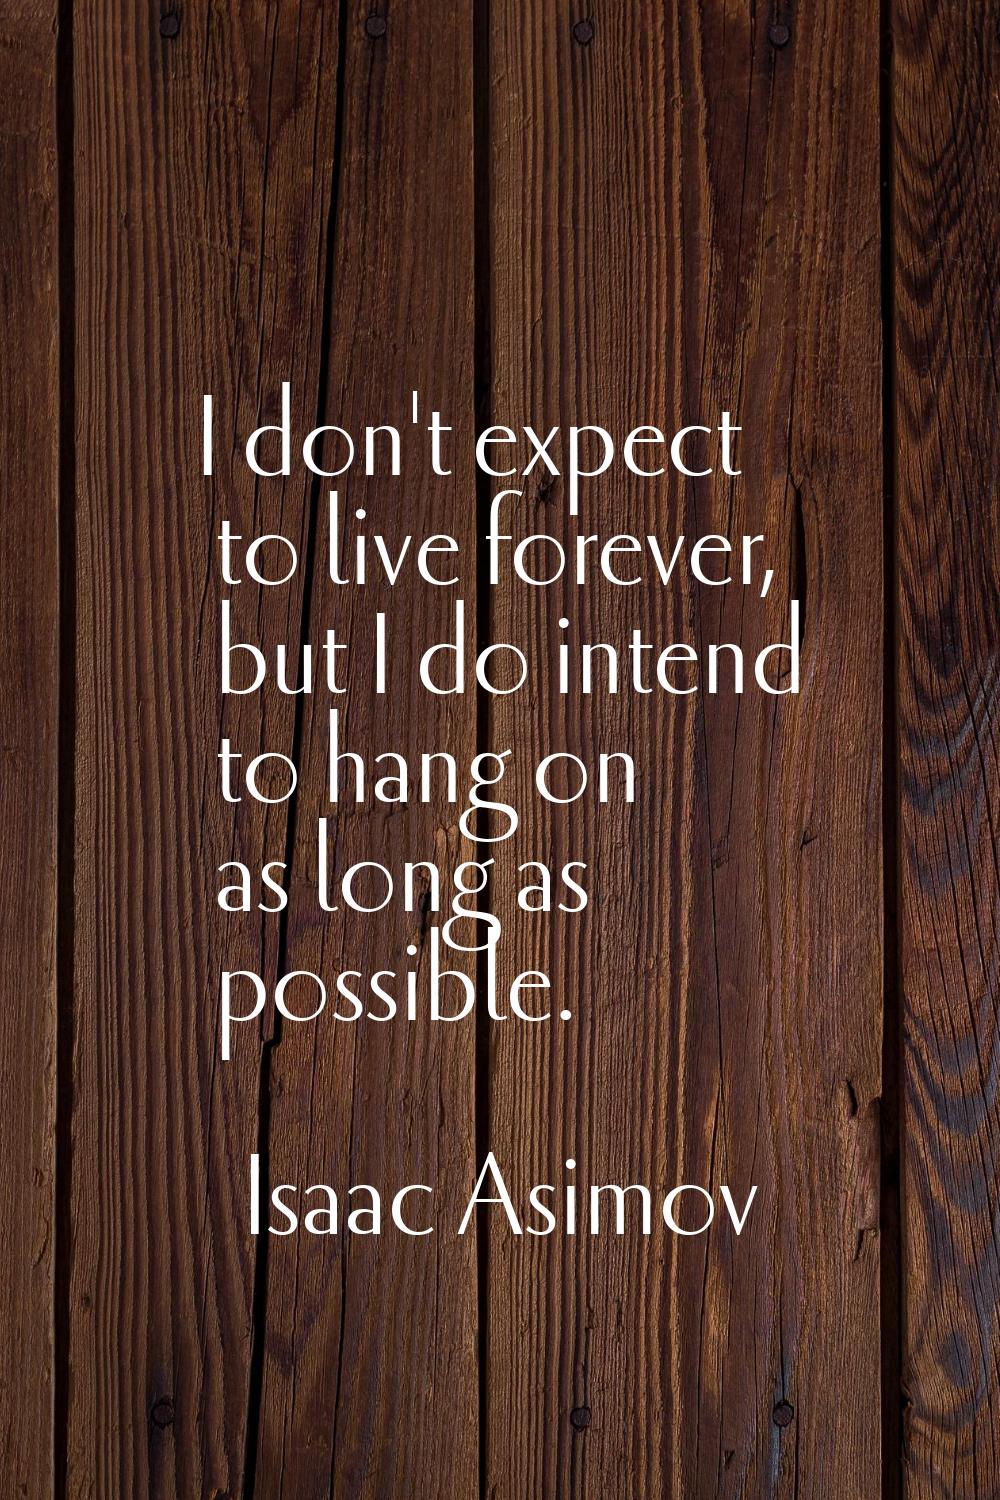 I don't expect to live forever, but I do intend to hang on as long as possible.